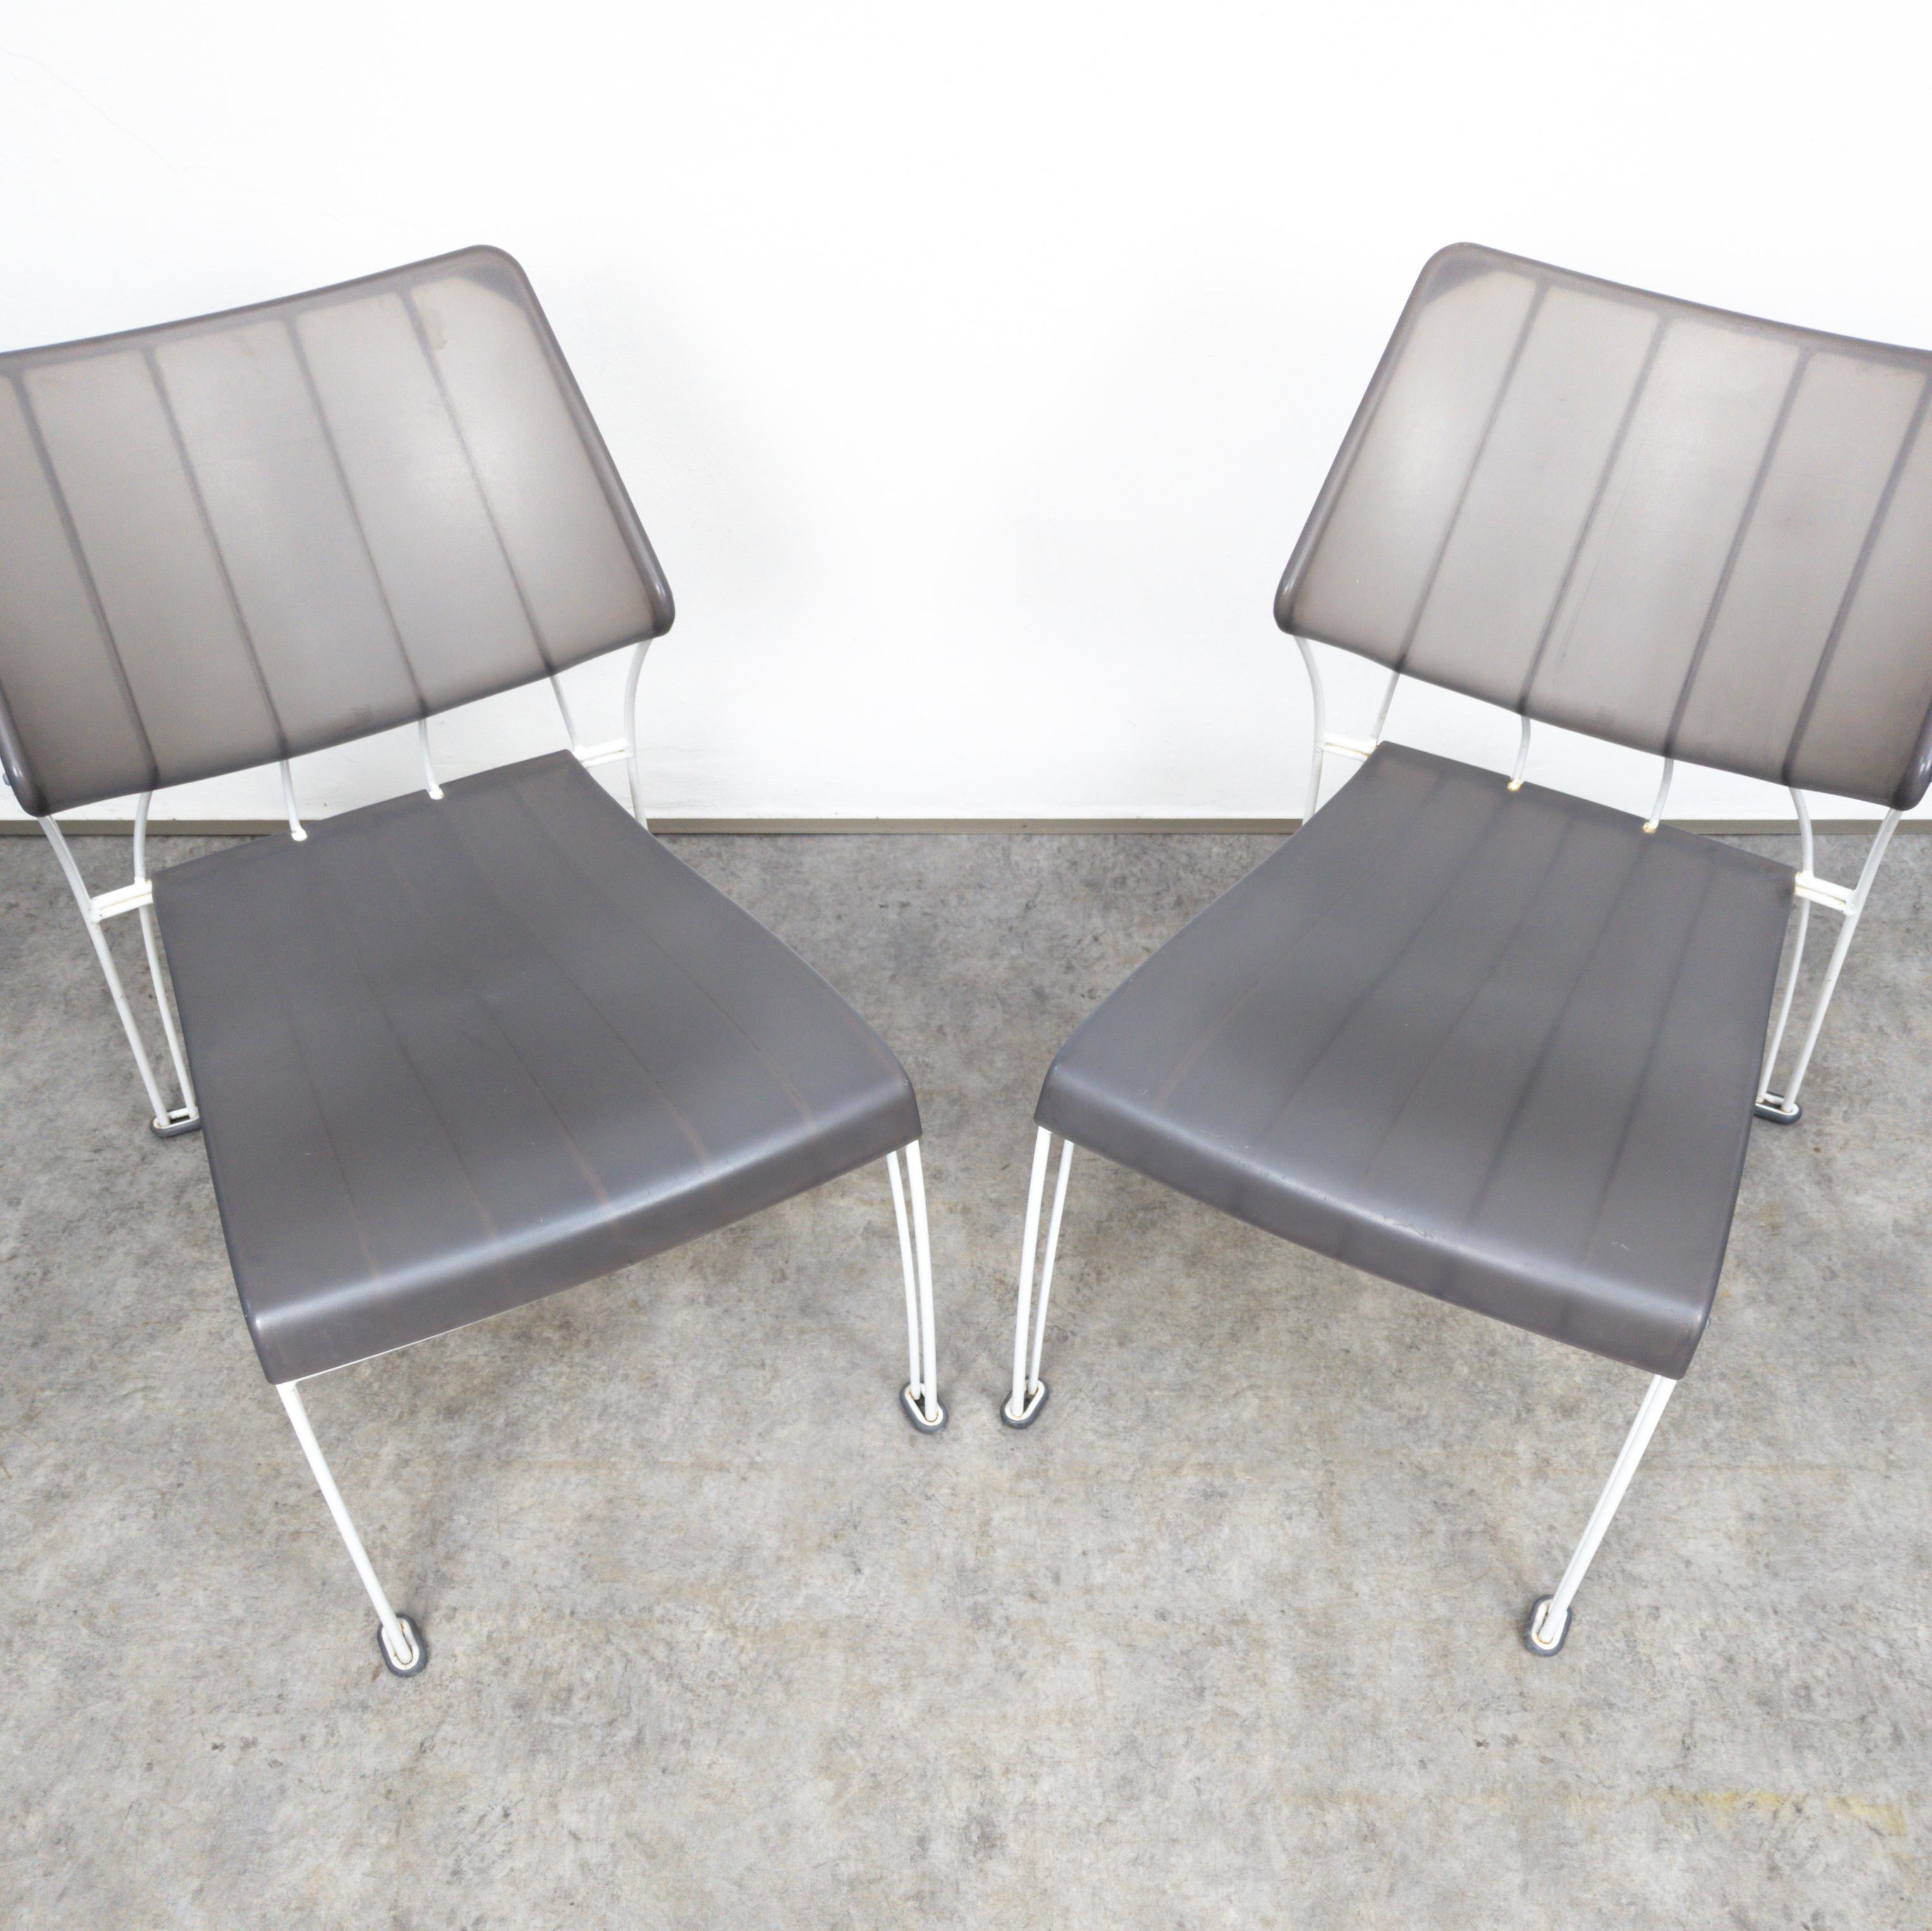 Pair of PS Hässlö outdoor lounge chairs by Monika Mulder for Ikea, 1990s For Sale 2